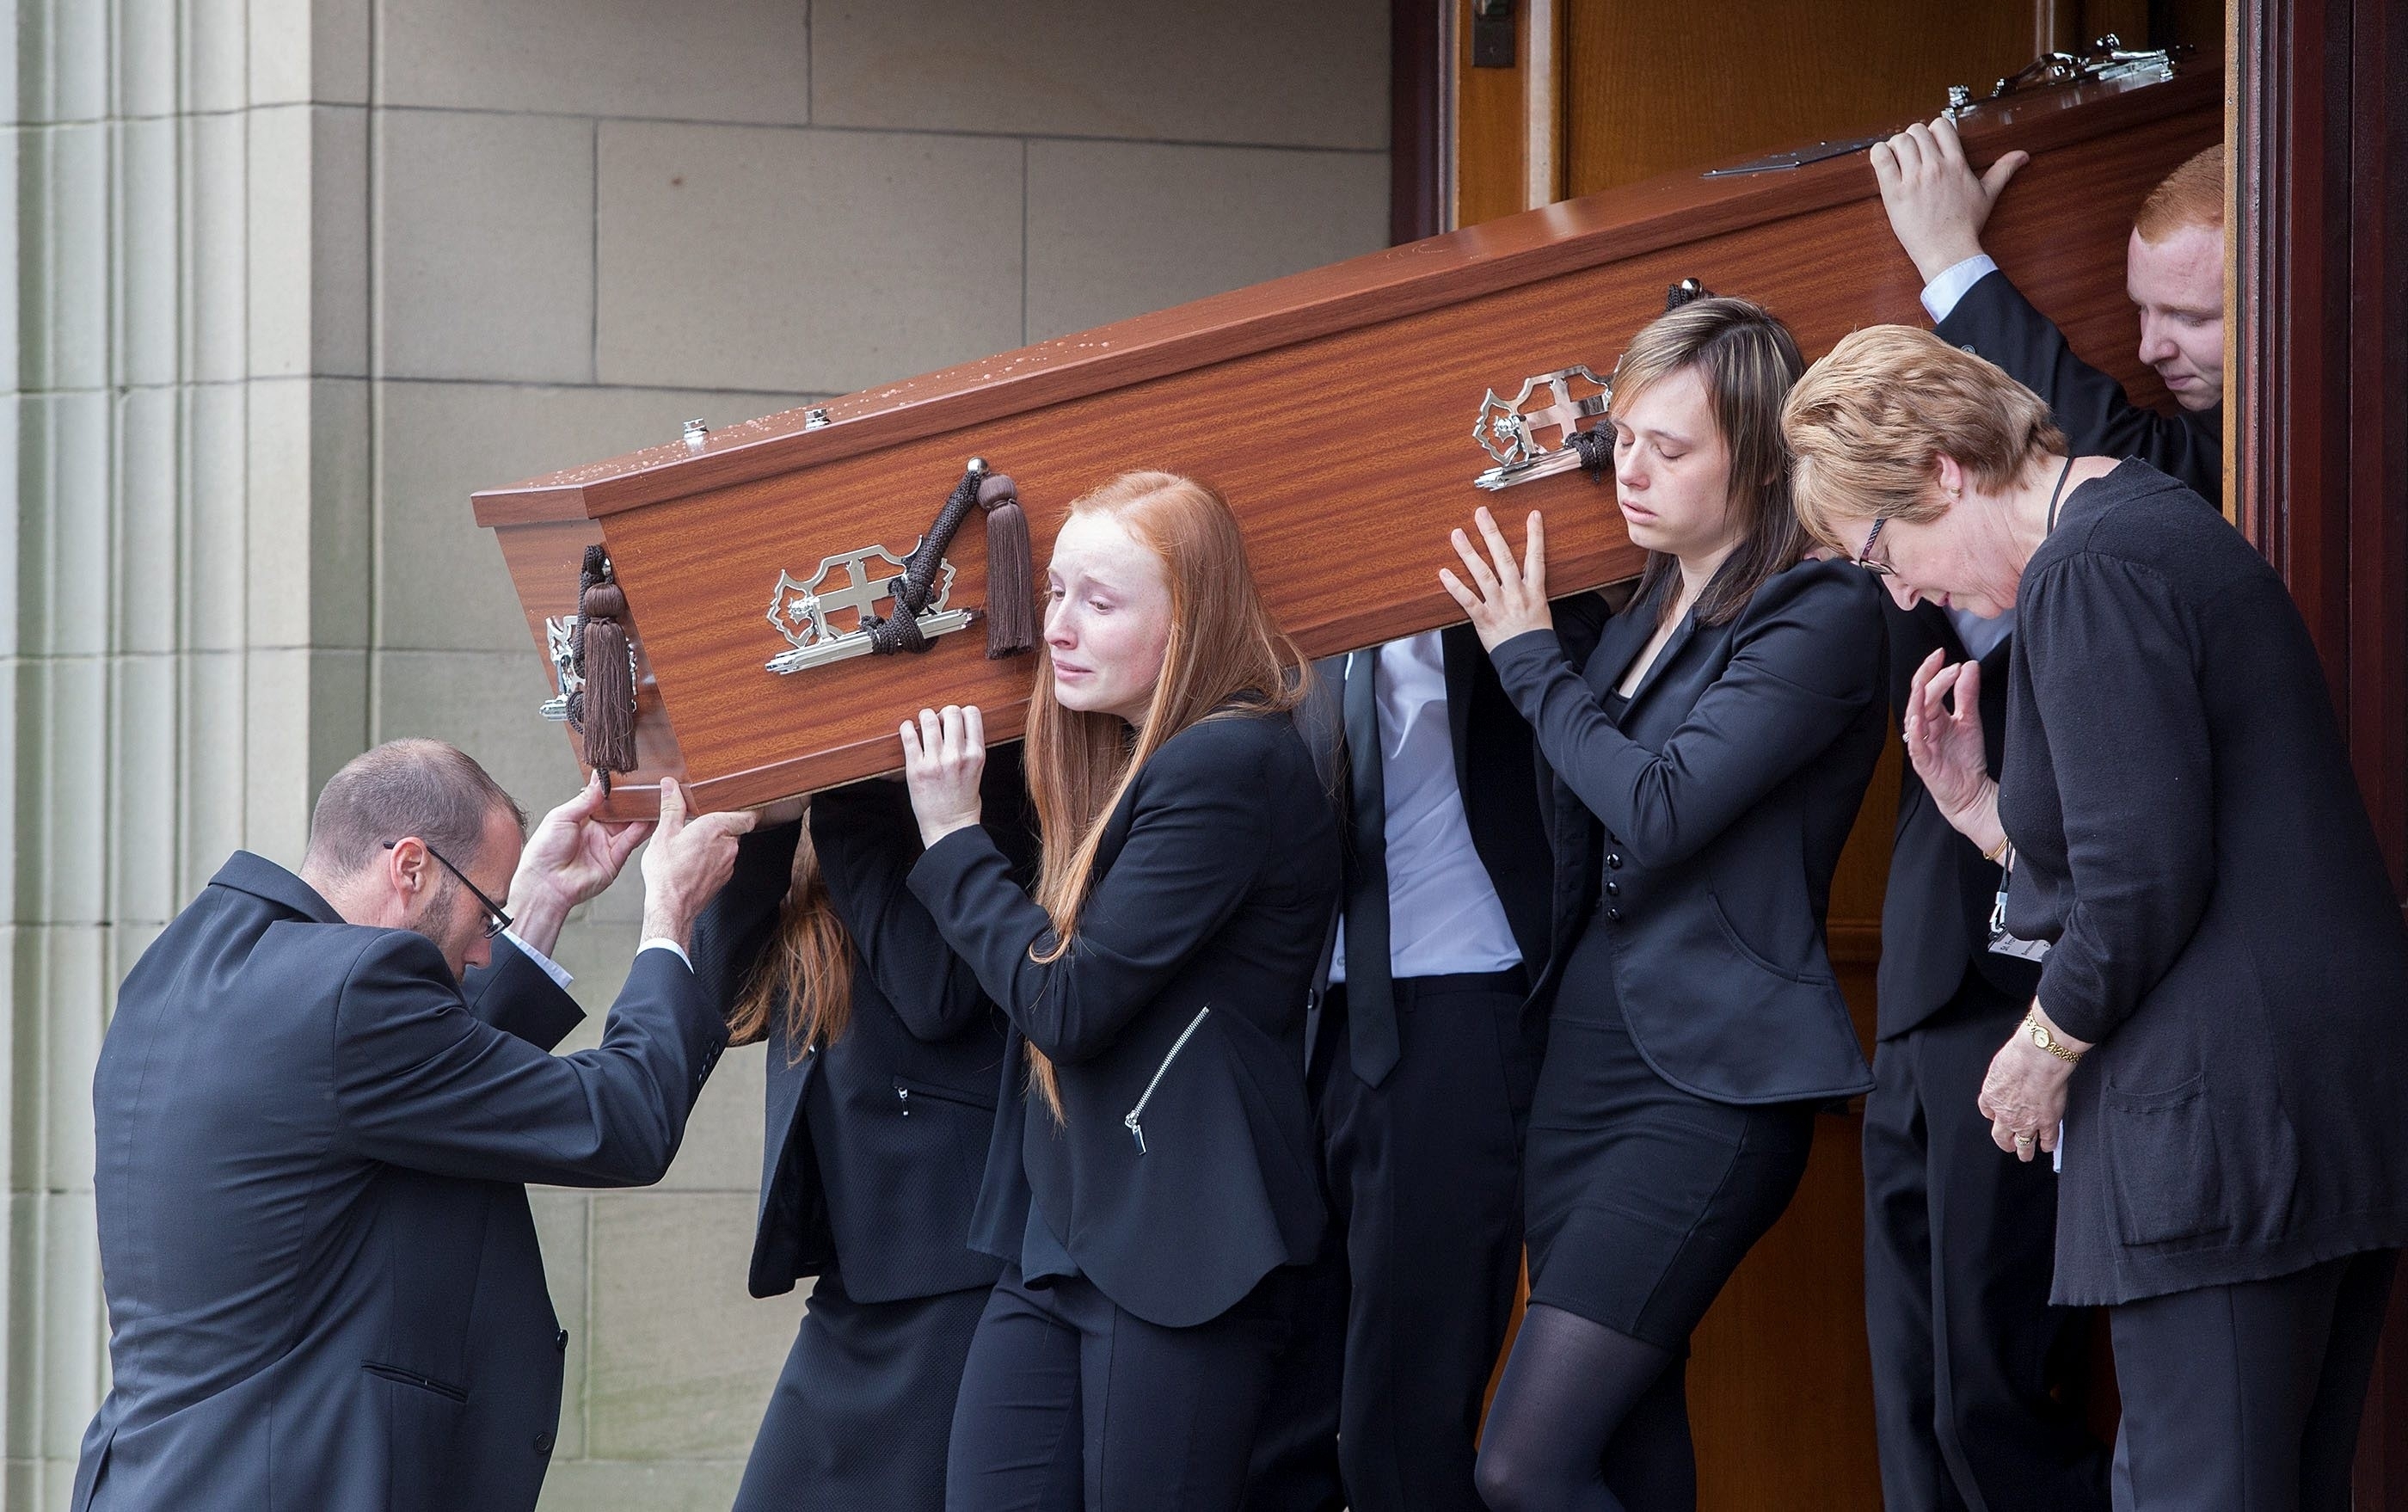 The coffin of John Yuill is carried out of the church by his brothers and sisters. The funeral of John Yuill, 28, who died when his car crashed off the M9 and lay undiscovered for three days. His partner Lamara Bell was in the car and died later in hospital. Takes place at St Francis Xaviers Church in Falkirk. July 30 2015. See Centre Press story CPFUNERAL;